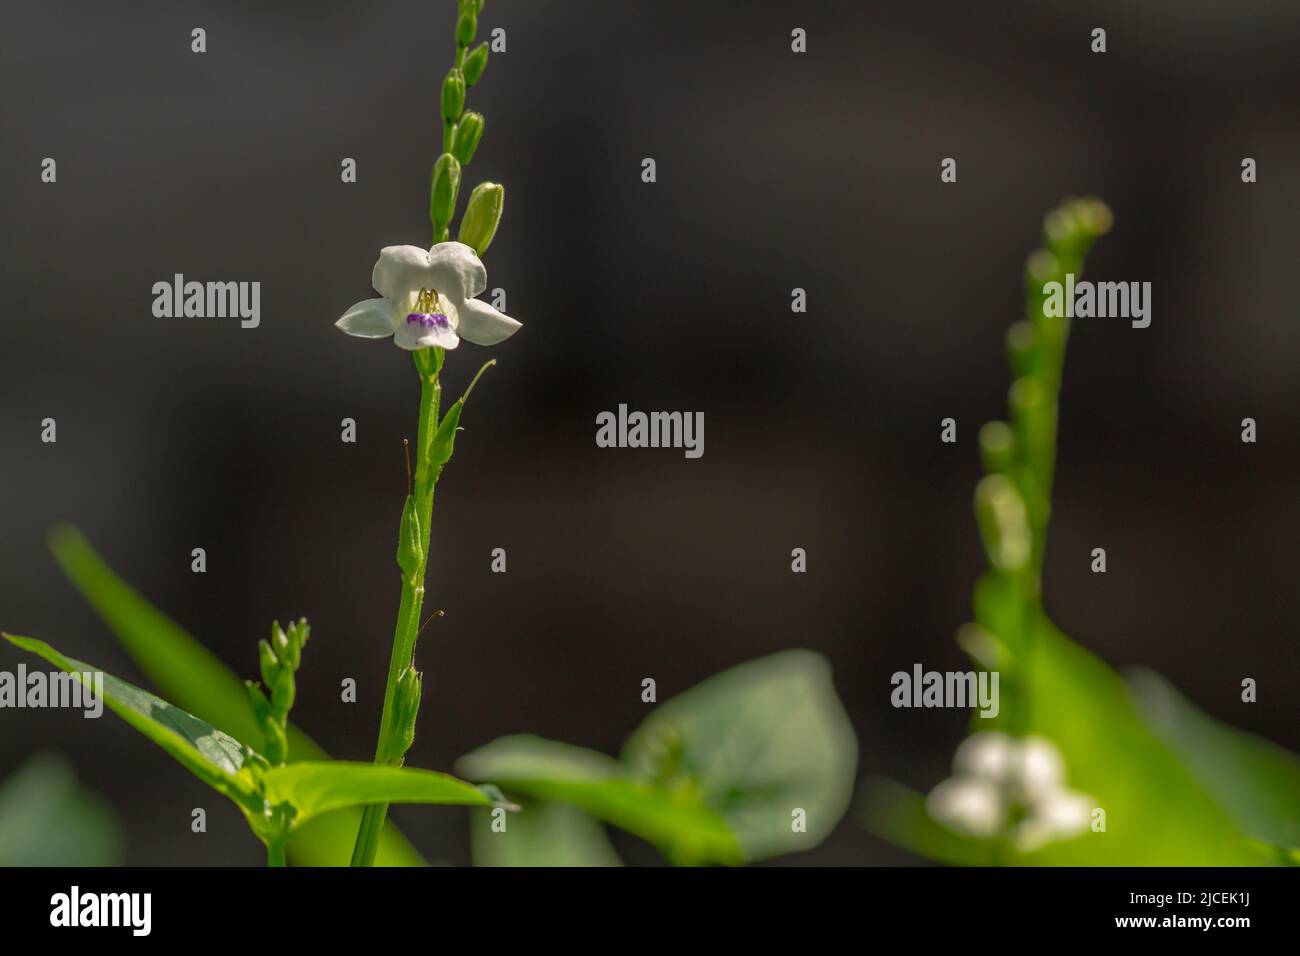 Green grass called chinese violet, leaves and stems are green, nature theme Stock Photo